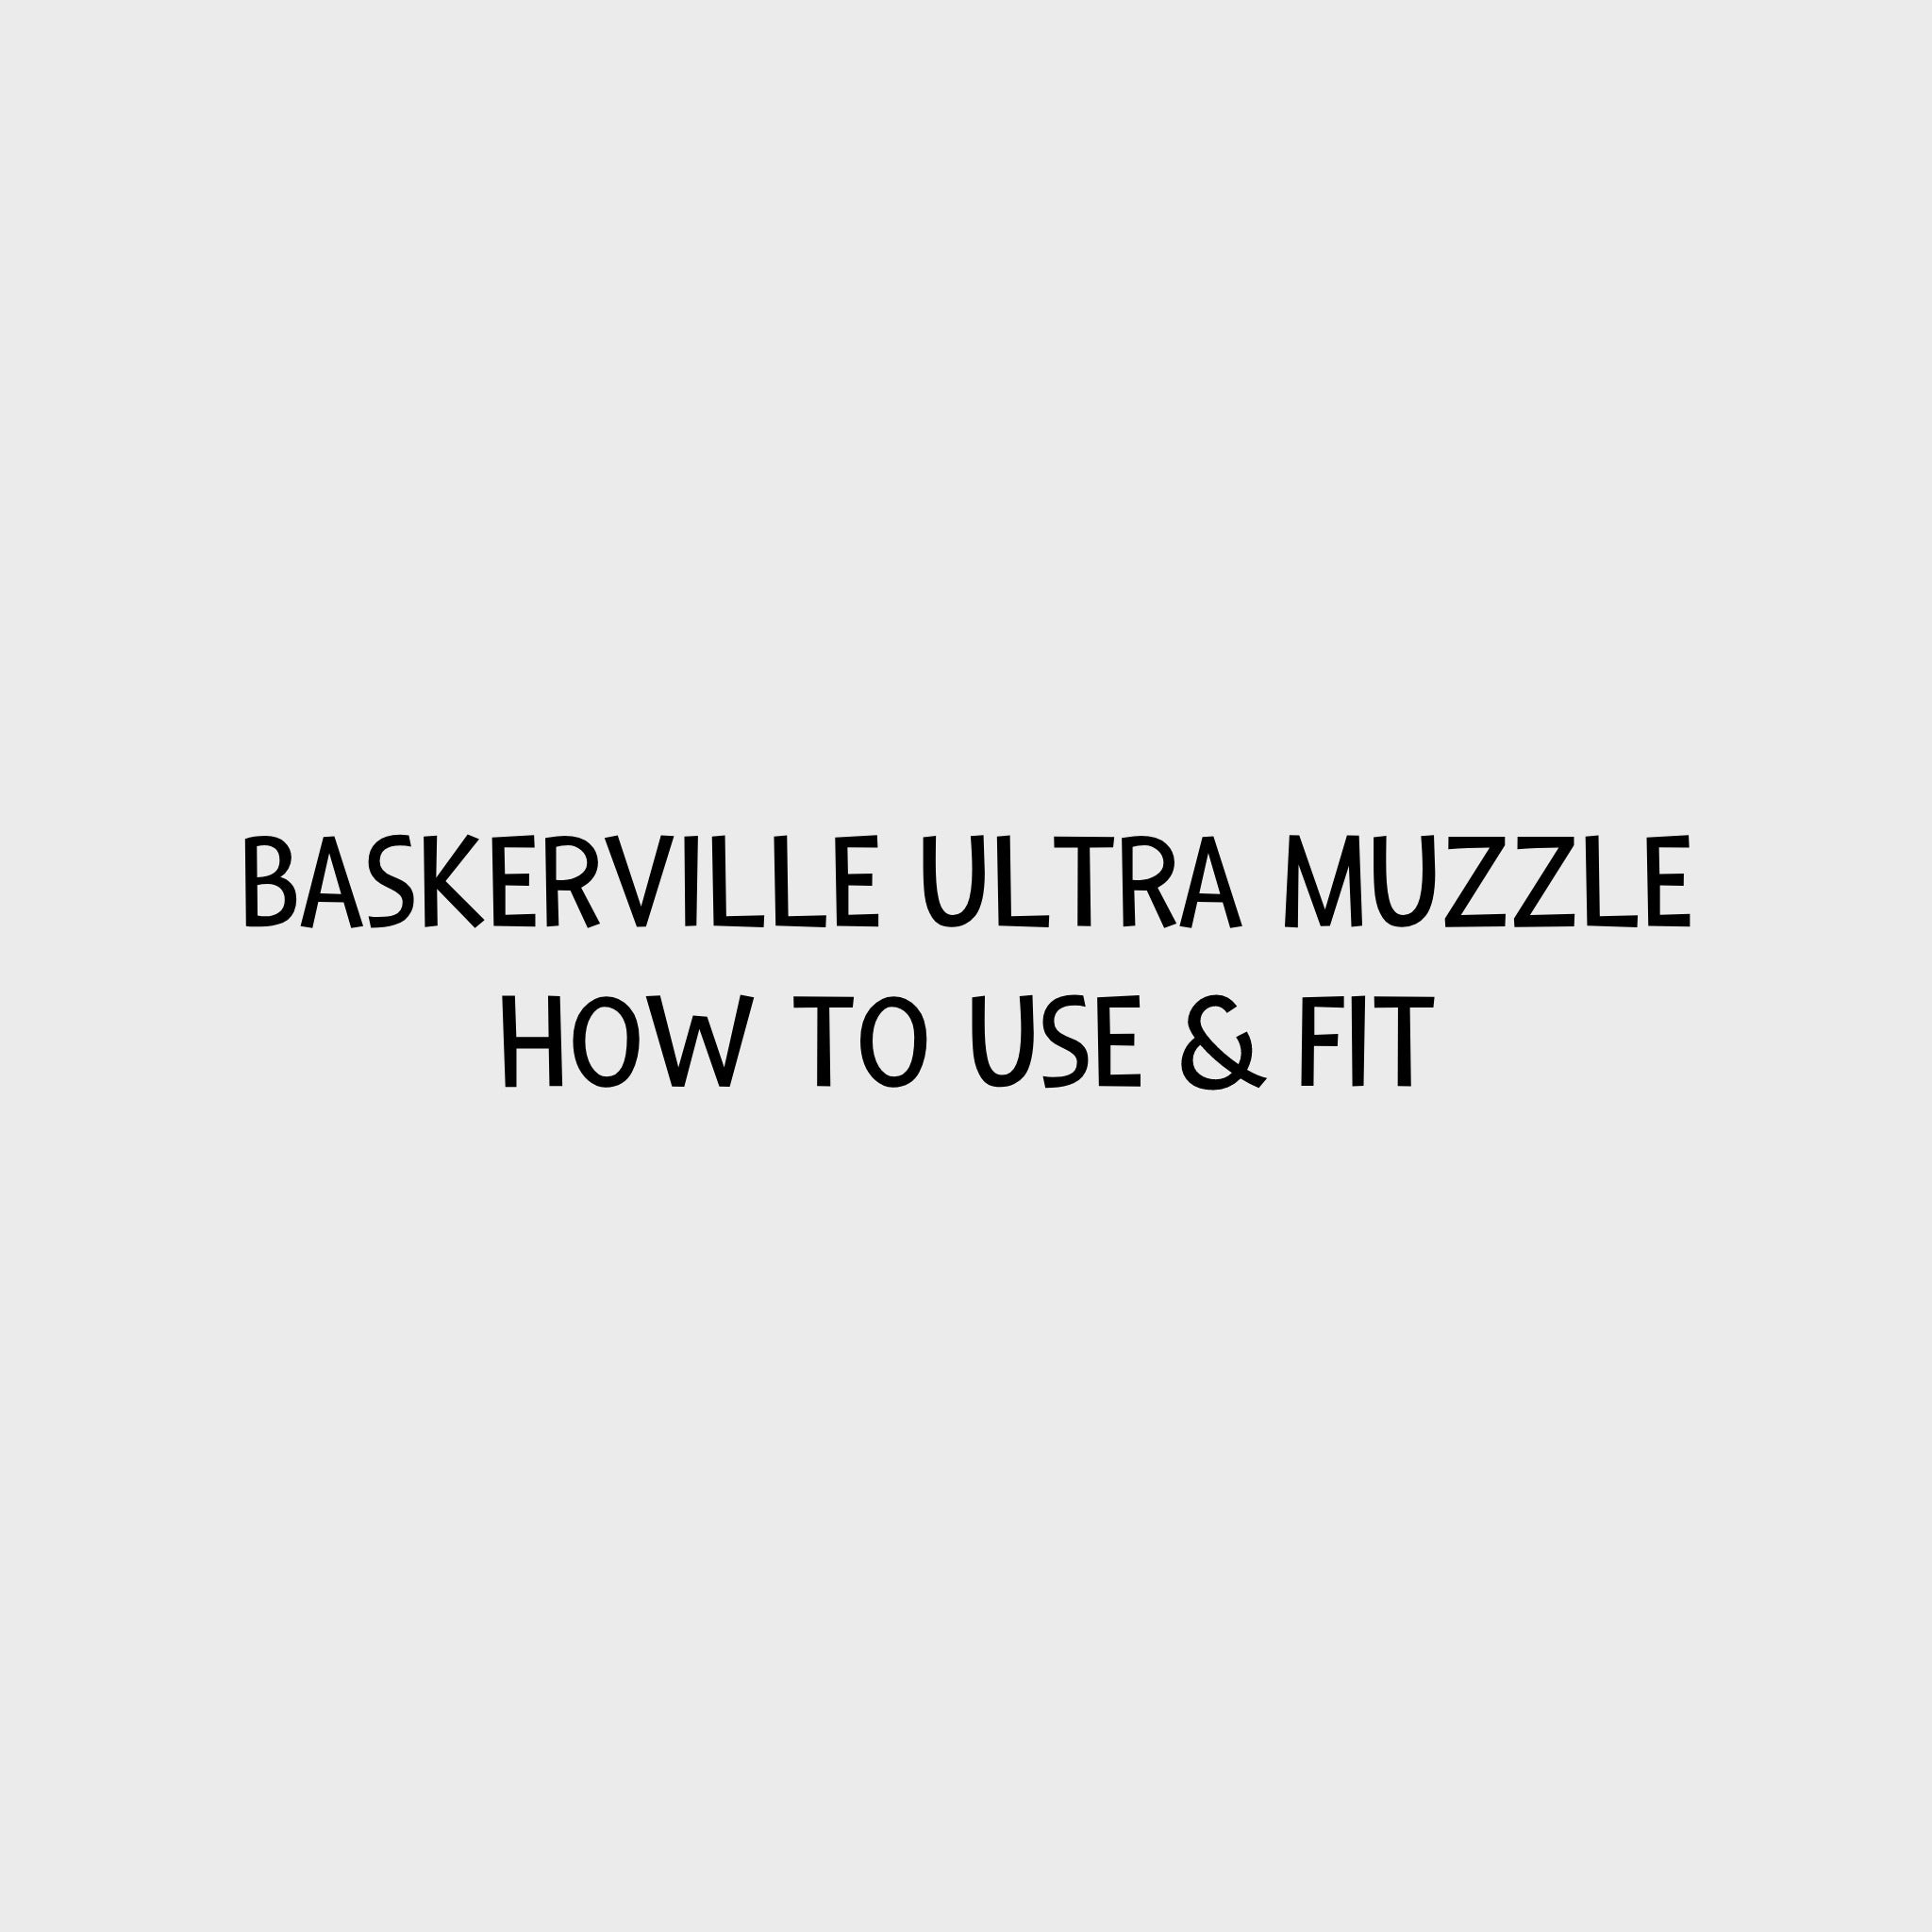 Video - Baskerville Ultra Muzzle - How to use &amp; fit